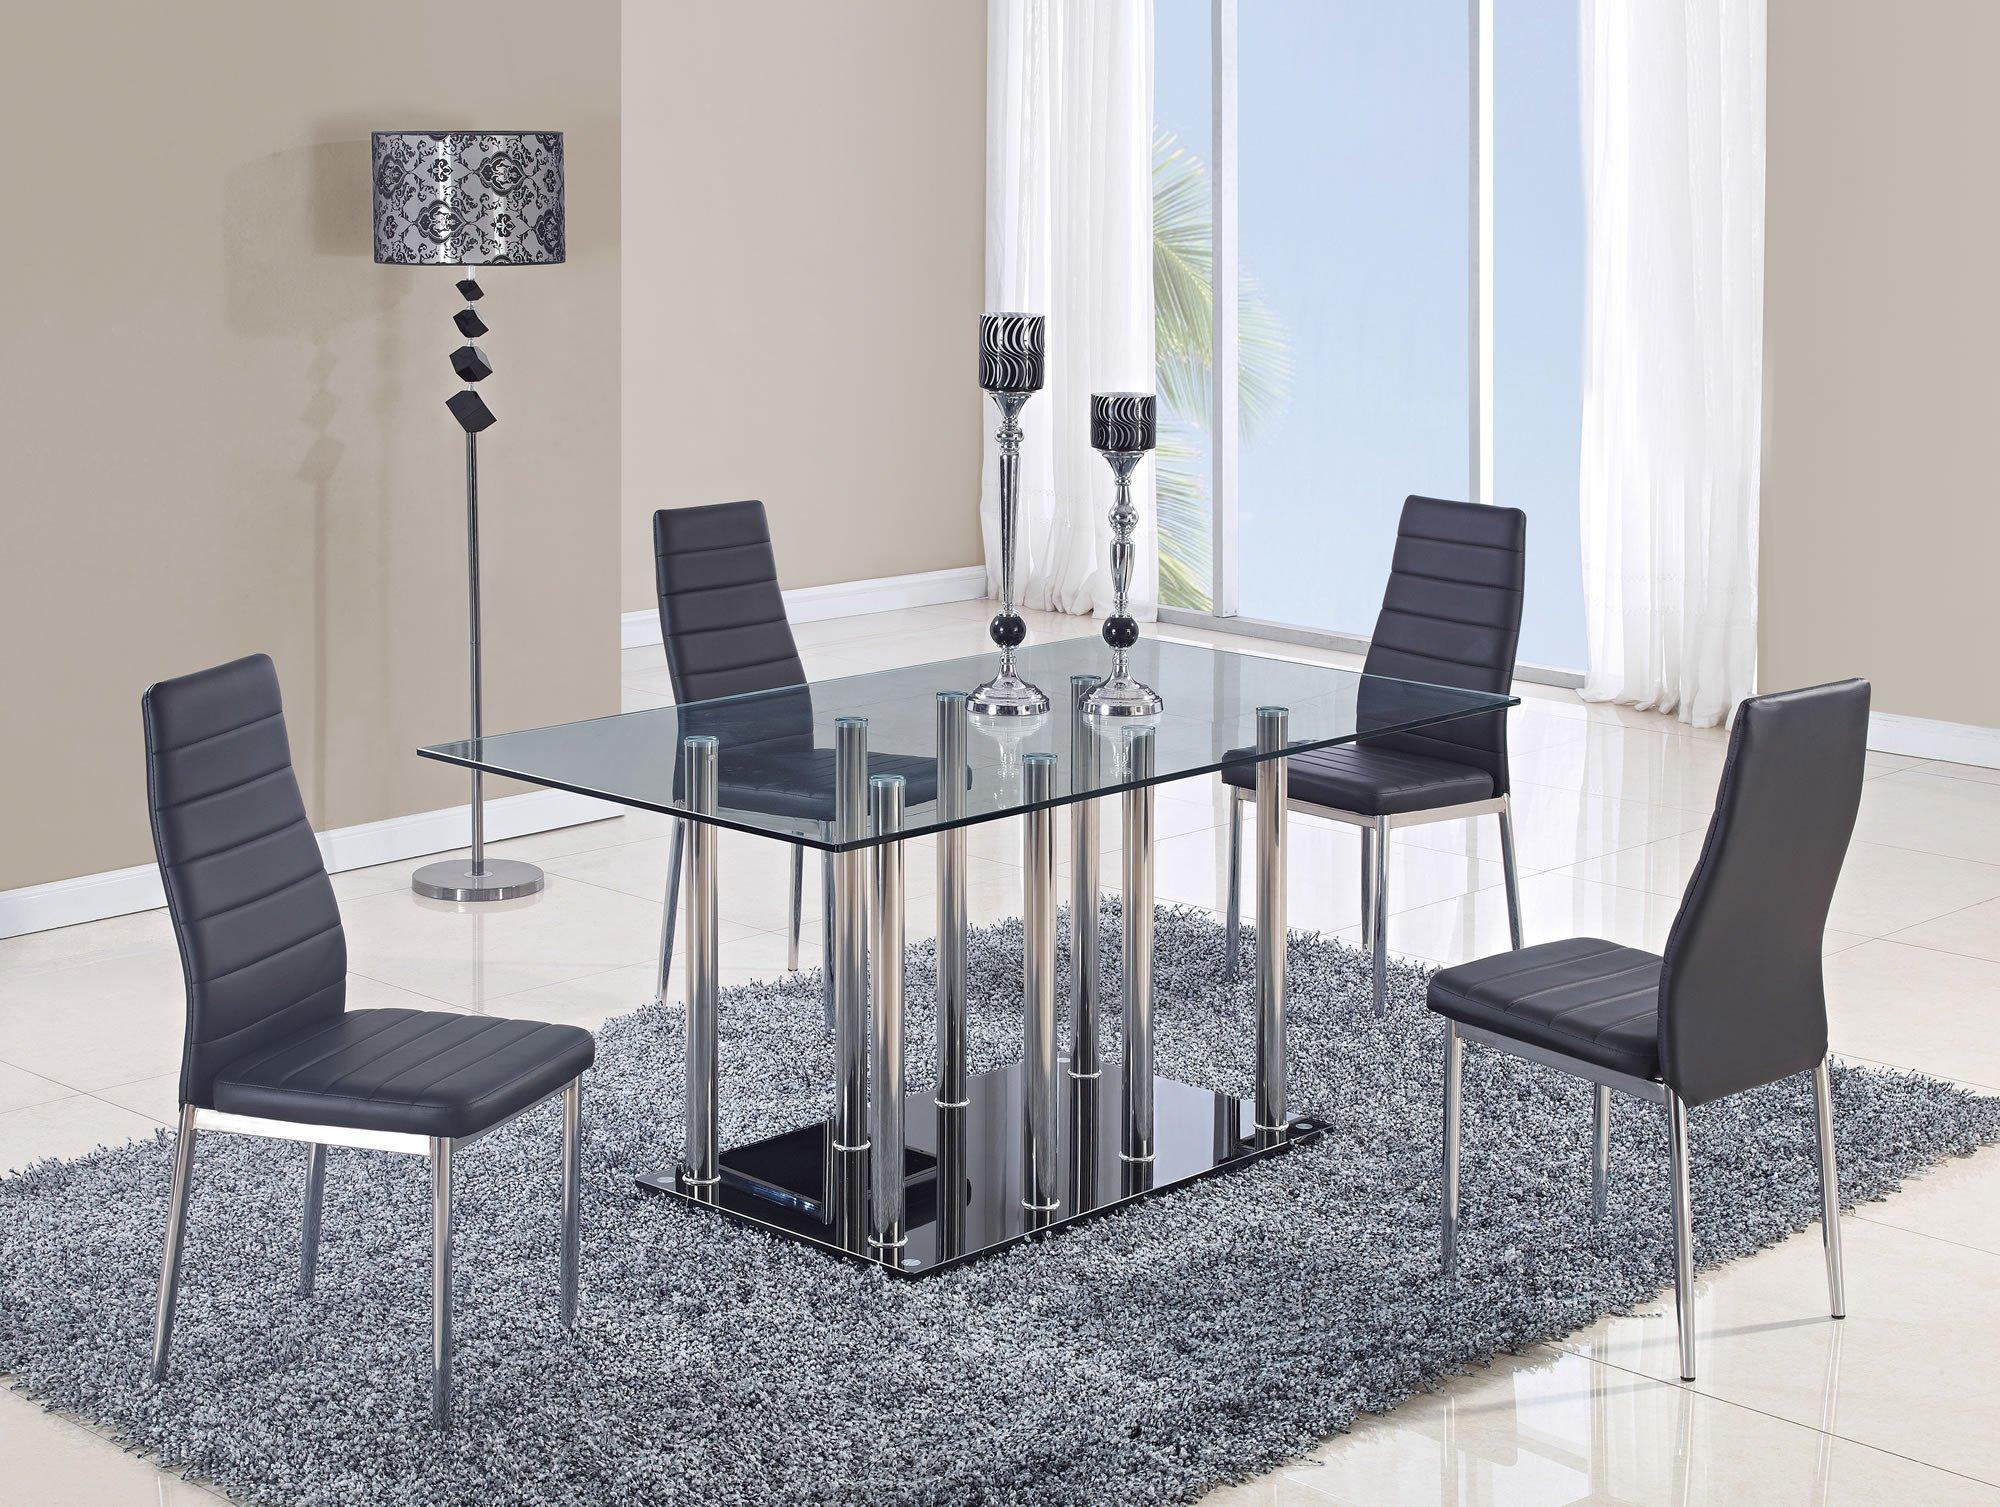 Contemporary Dining Sets D368 DINING SET D368DT-5PC in Chrome, Black Glass Top